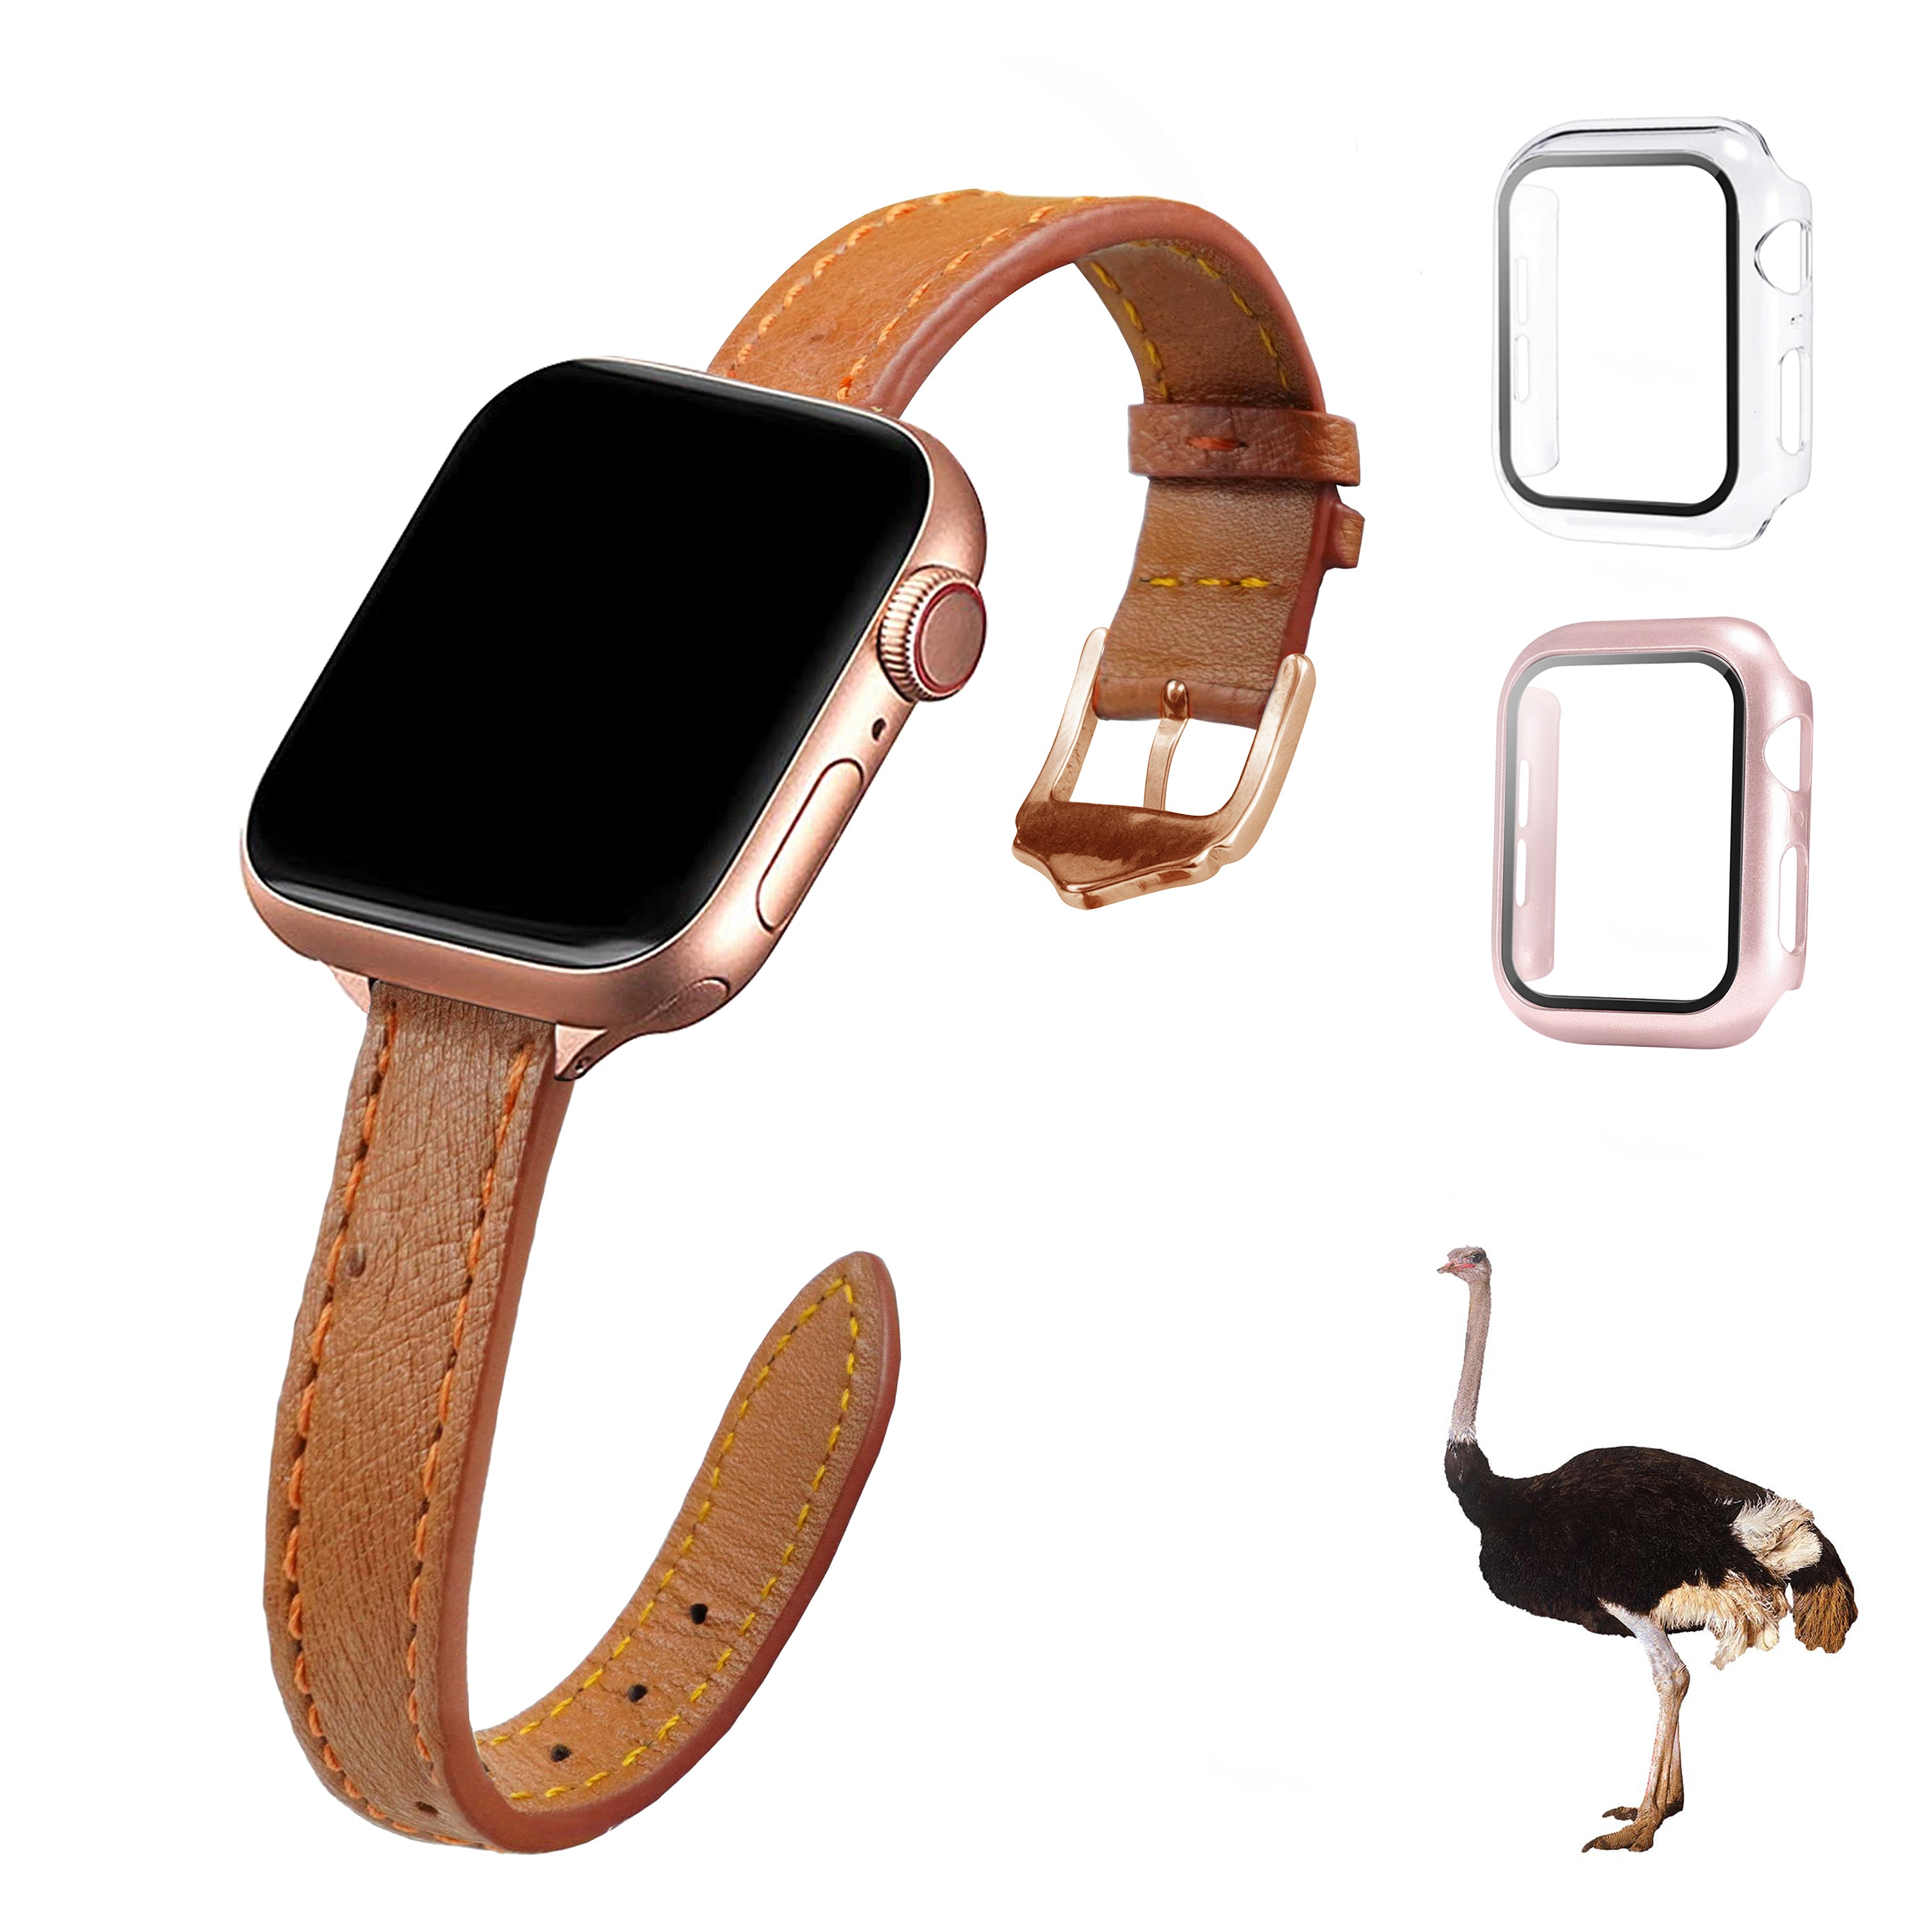 Light Brown Flat Ostrich Leather Band Compatible Apple Watch Iwatch 42mm Screen Protector Case Gold Adapter Replacement Strap For Smartwatch Series 1 2 3 Leather Handmade AW-186G-W-42MM